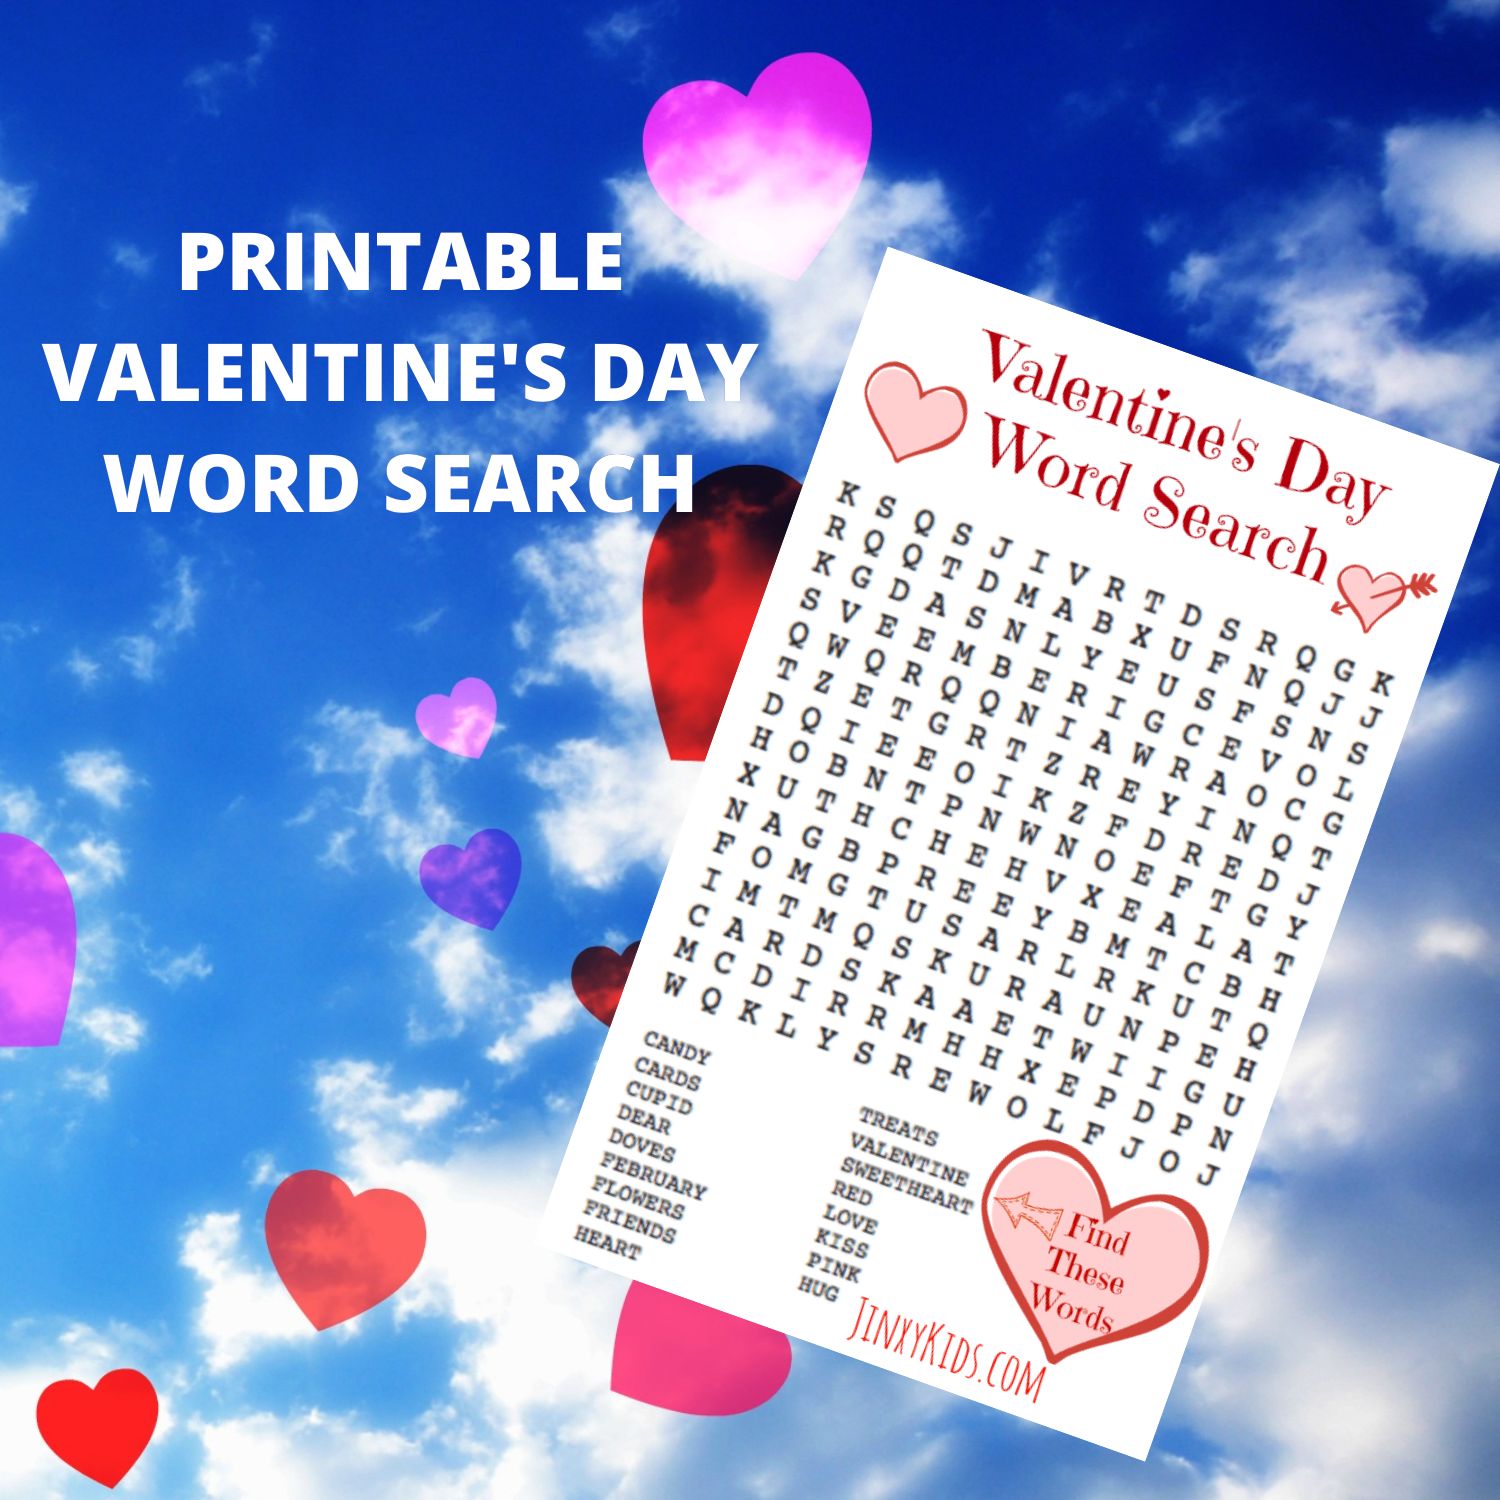 PRINTABLE VALENTINE'S DAY WORD SEARCH (1500 × 1500 px)